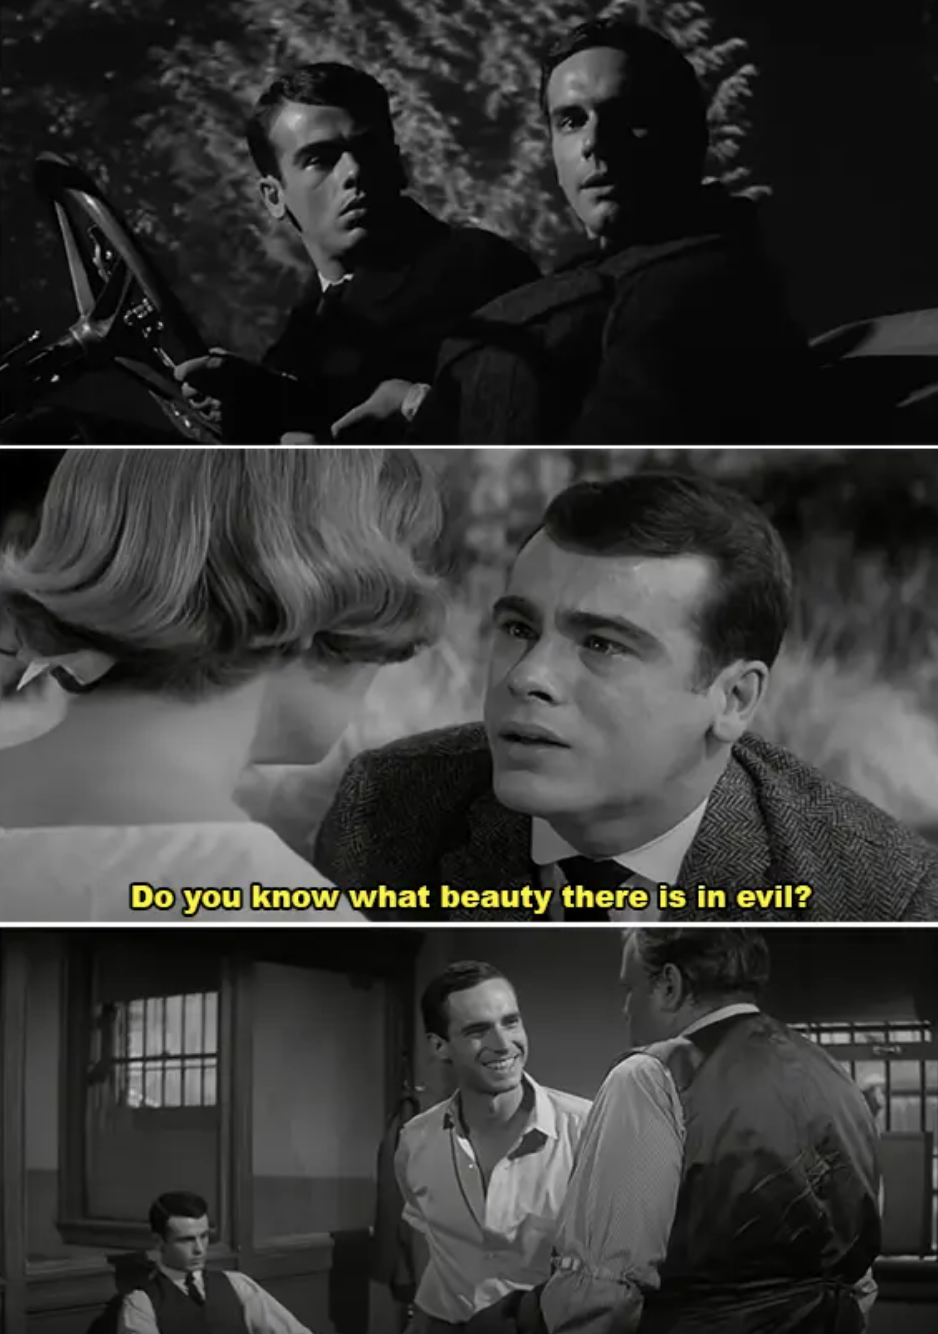 Three black-and-white scenes from a movie featuring Sean Connery: the first in a car, the second with a woman, and the third in a prison cell. Text: "Do you know what beauty there is in evil?"